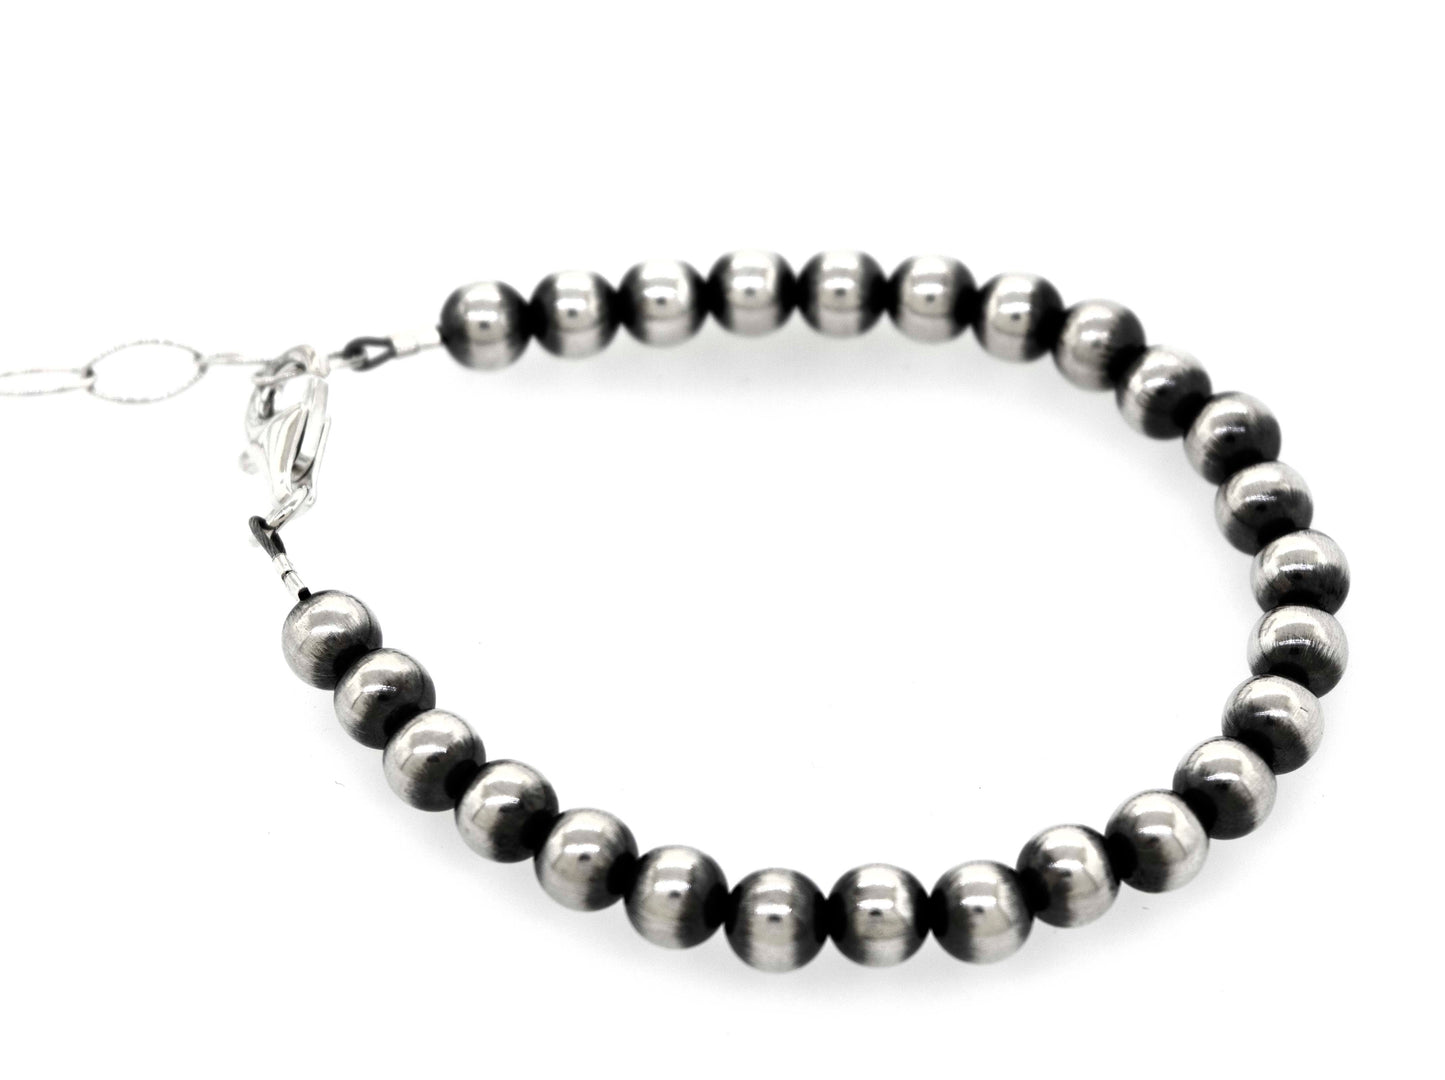 A Super Silver Handcrafted Navajo Pearl Bracelet with a vintage vibe on a white background.